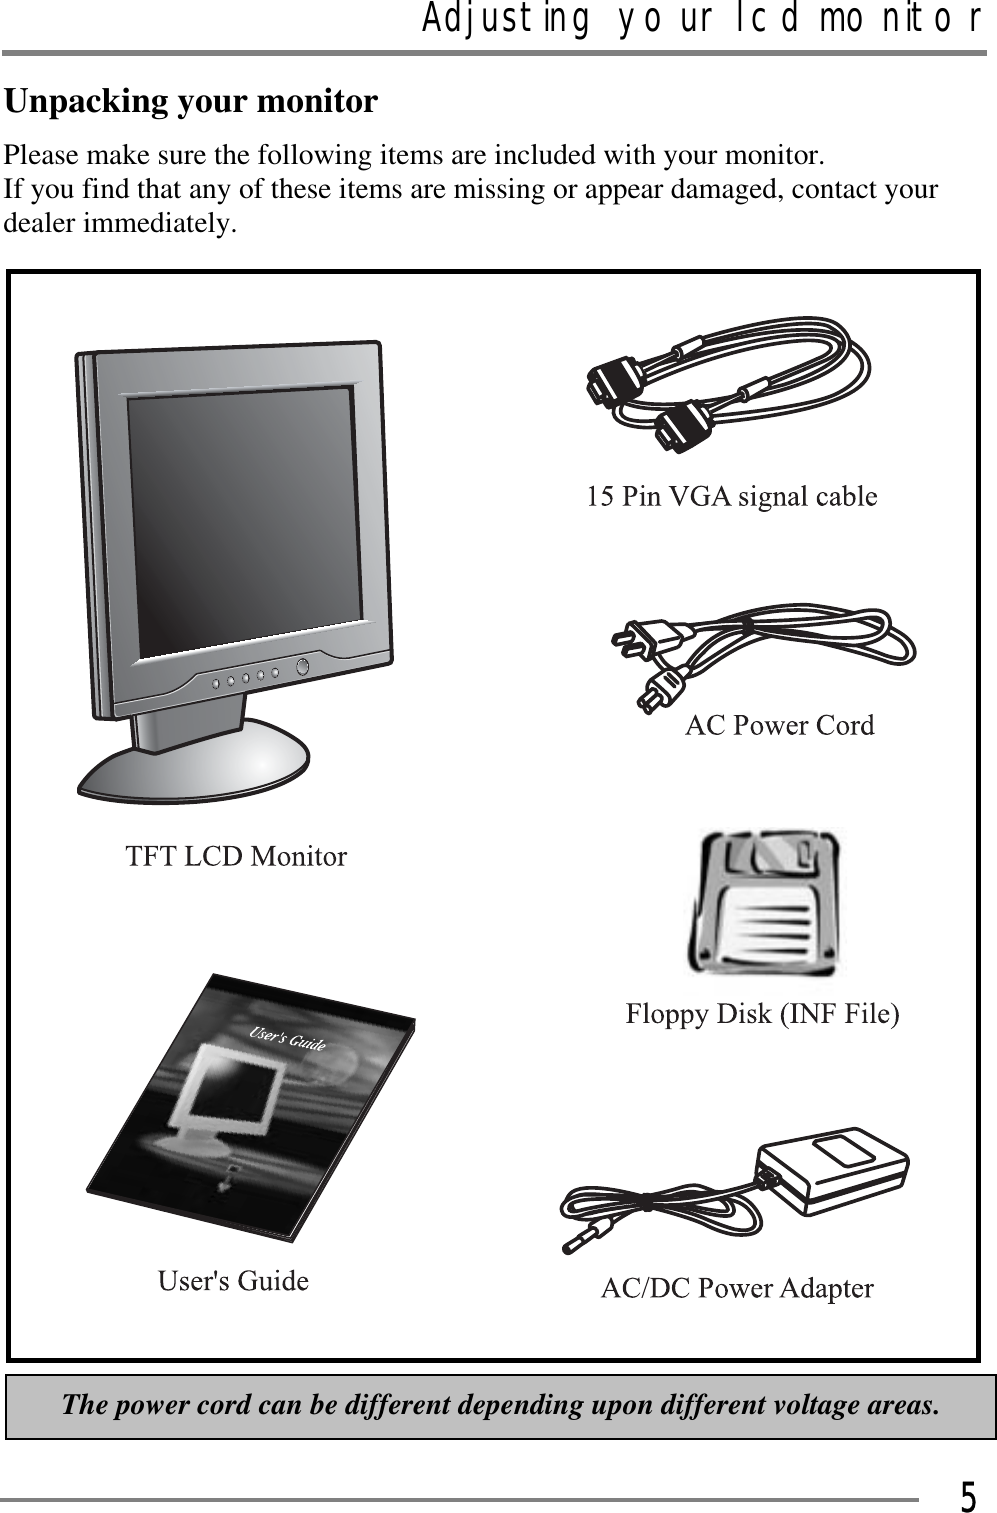 Adjusting your lcd monitorGGG5Unpacking your monitor Please make sure the following items are included with your monitor.   If you find that any of these items are missing or appear damaged, contact your dealer immediately. GGGGGThe power cord can be different depending upon different voltage areas. 